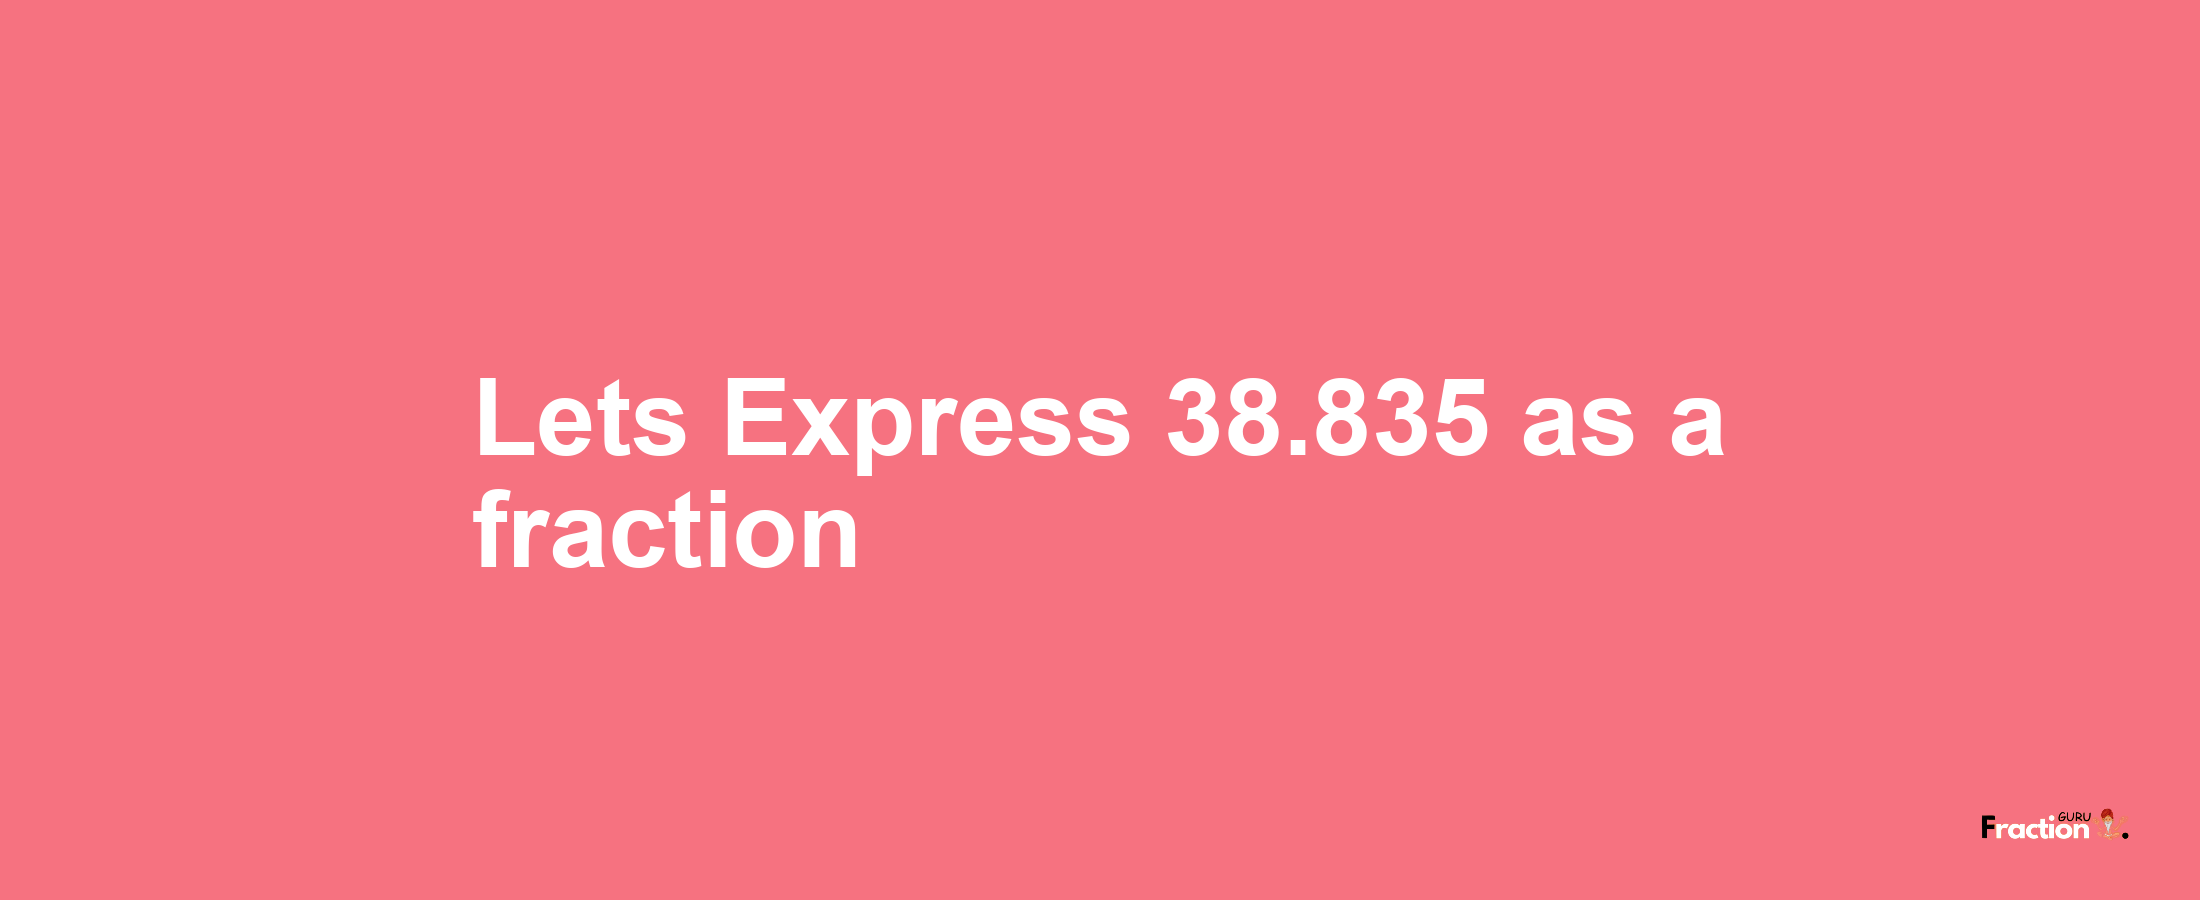 Lets Express 38.835 as afraction